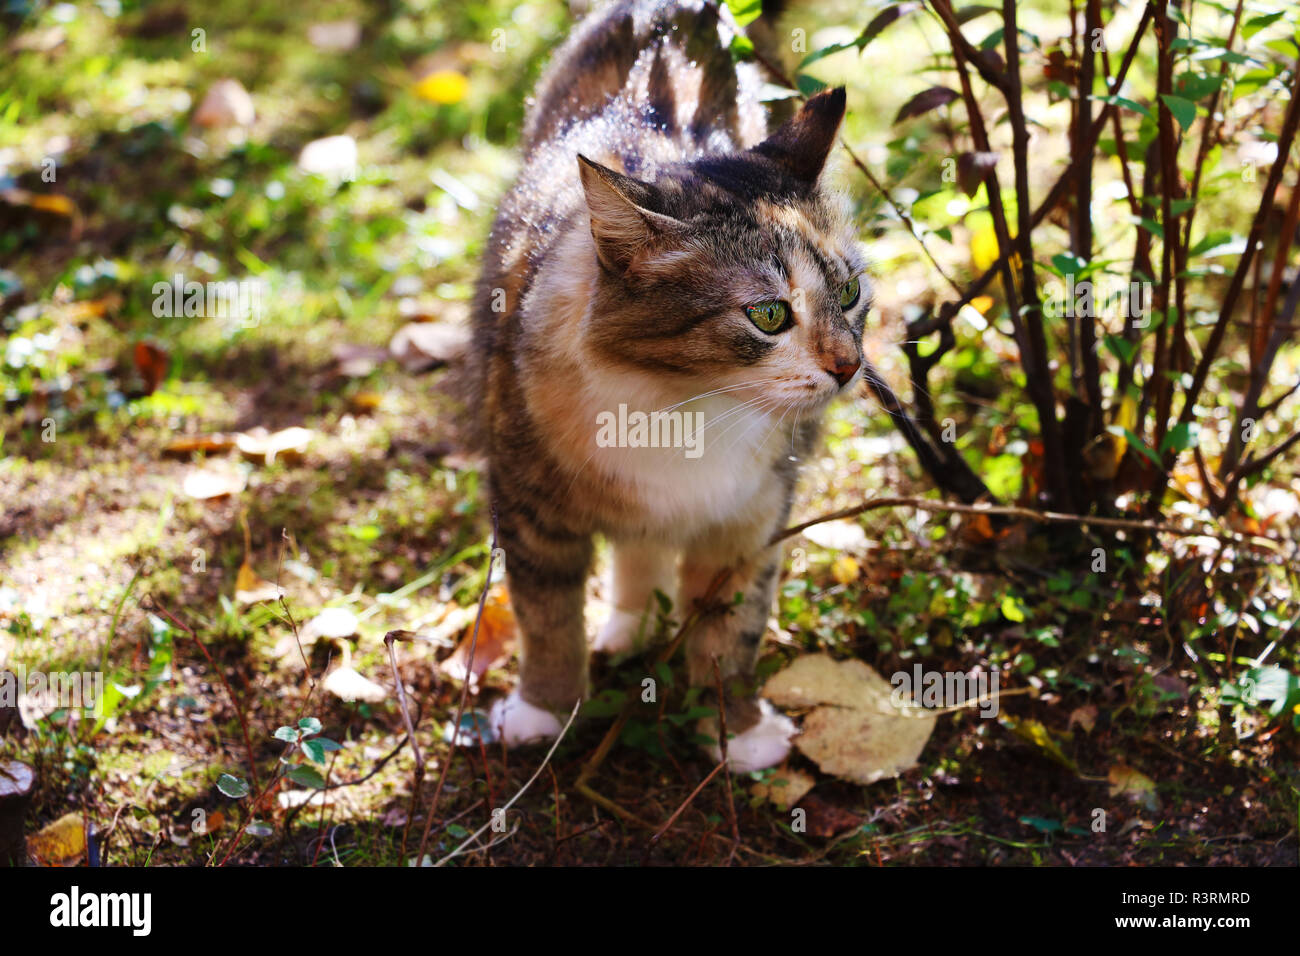 A cat with bright green eyes in the garden Stock Photo